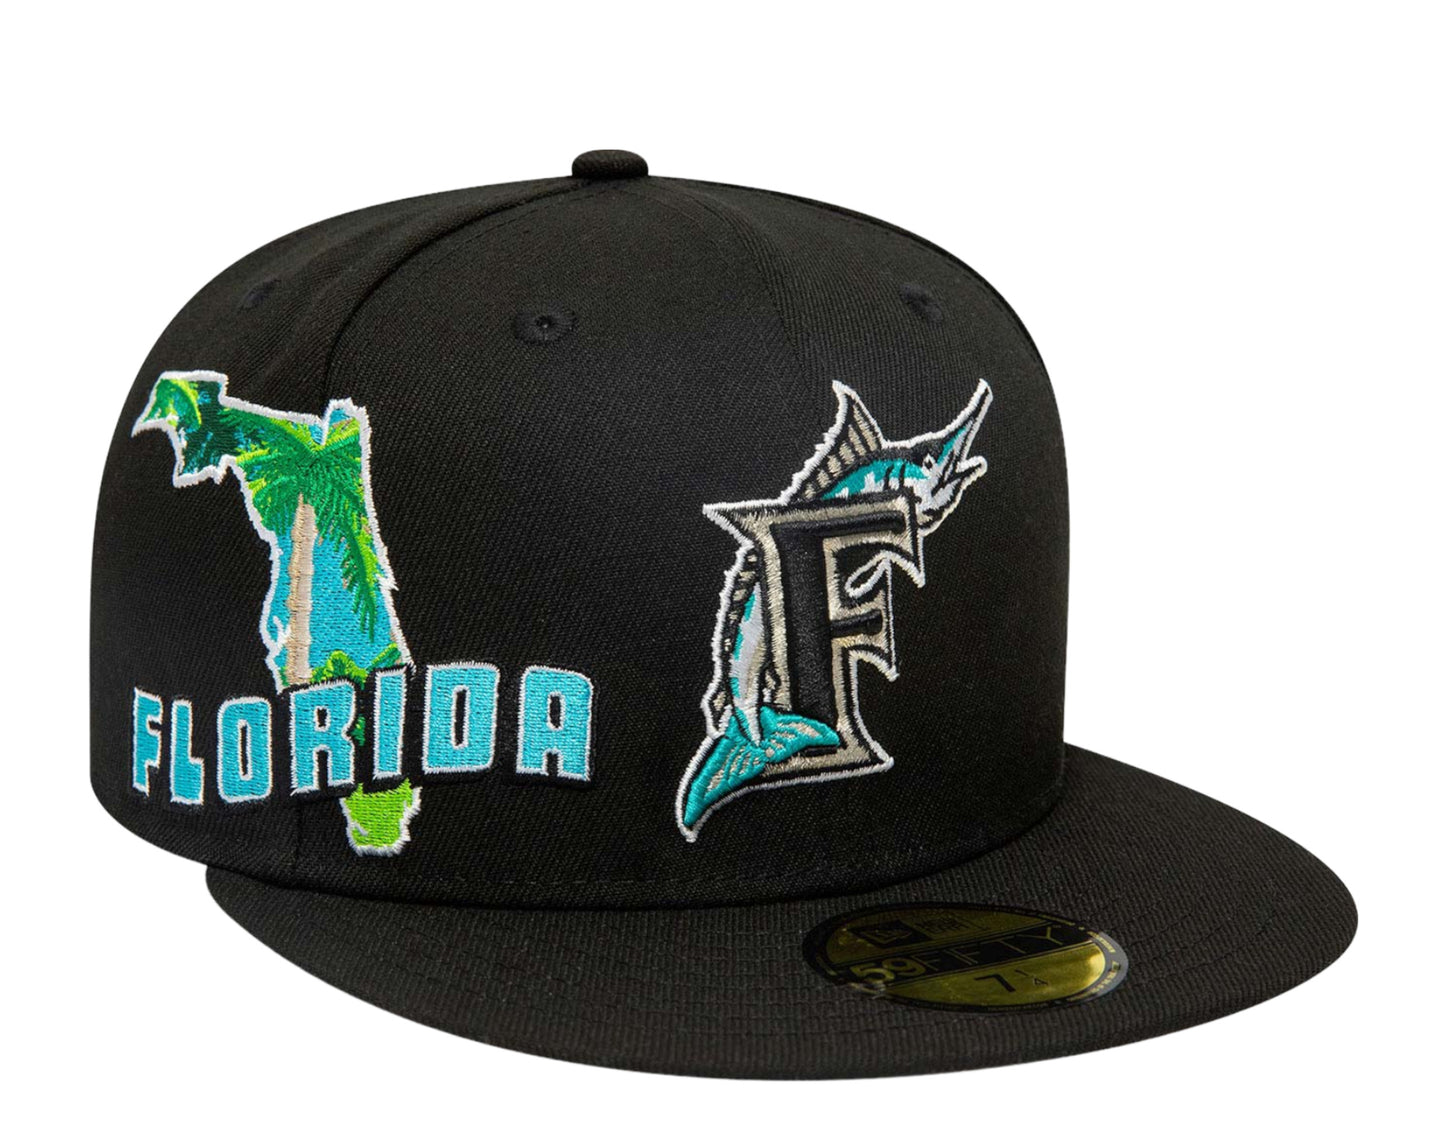 New Era 59FIFTY MLB Florida Marlins Stateview Fitted Hat 7